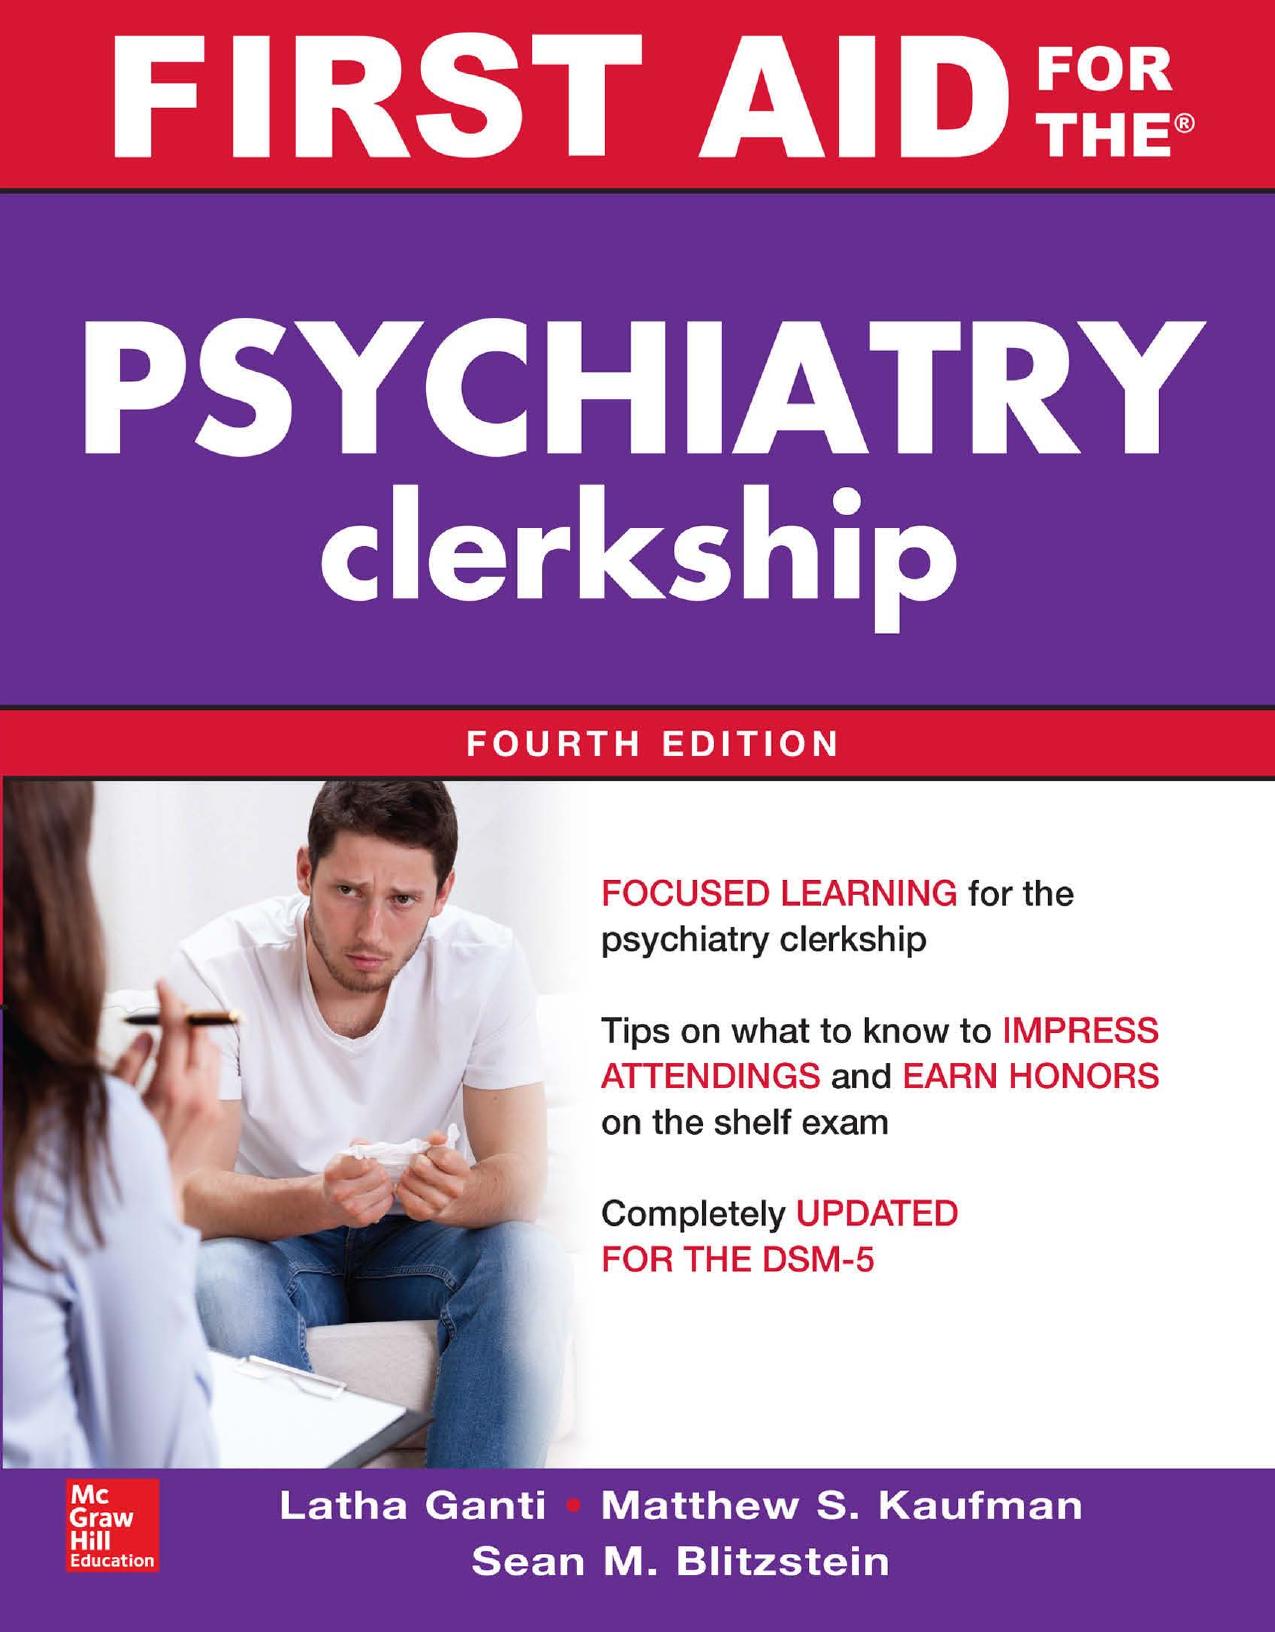 First Aid for The® Psychiatry Clerkship: Fourth Edition